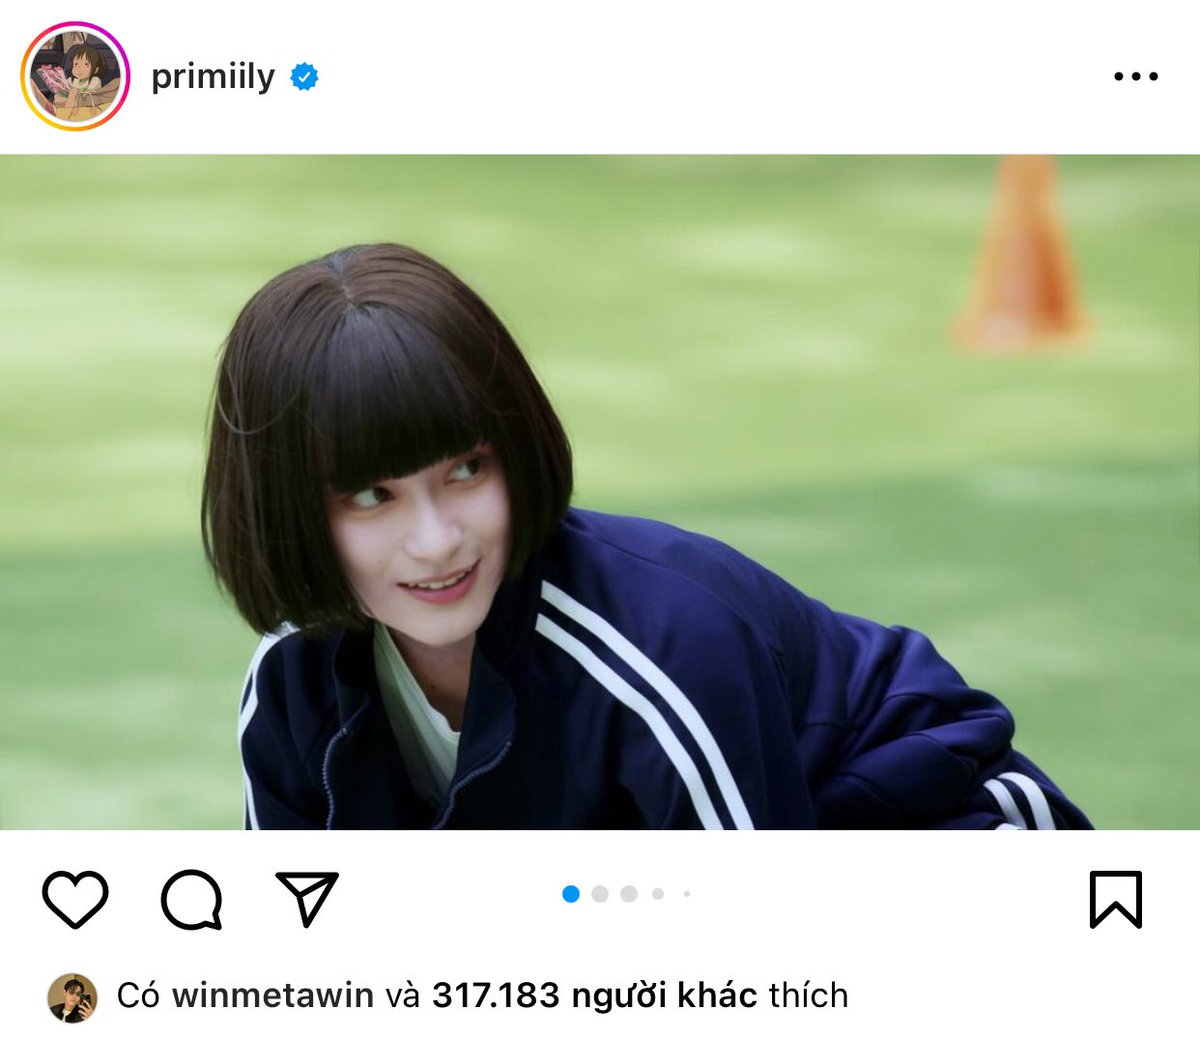 Win liked the post to support Prim's new series 🥳 #winmetawin #primiily